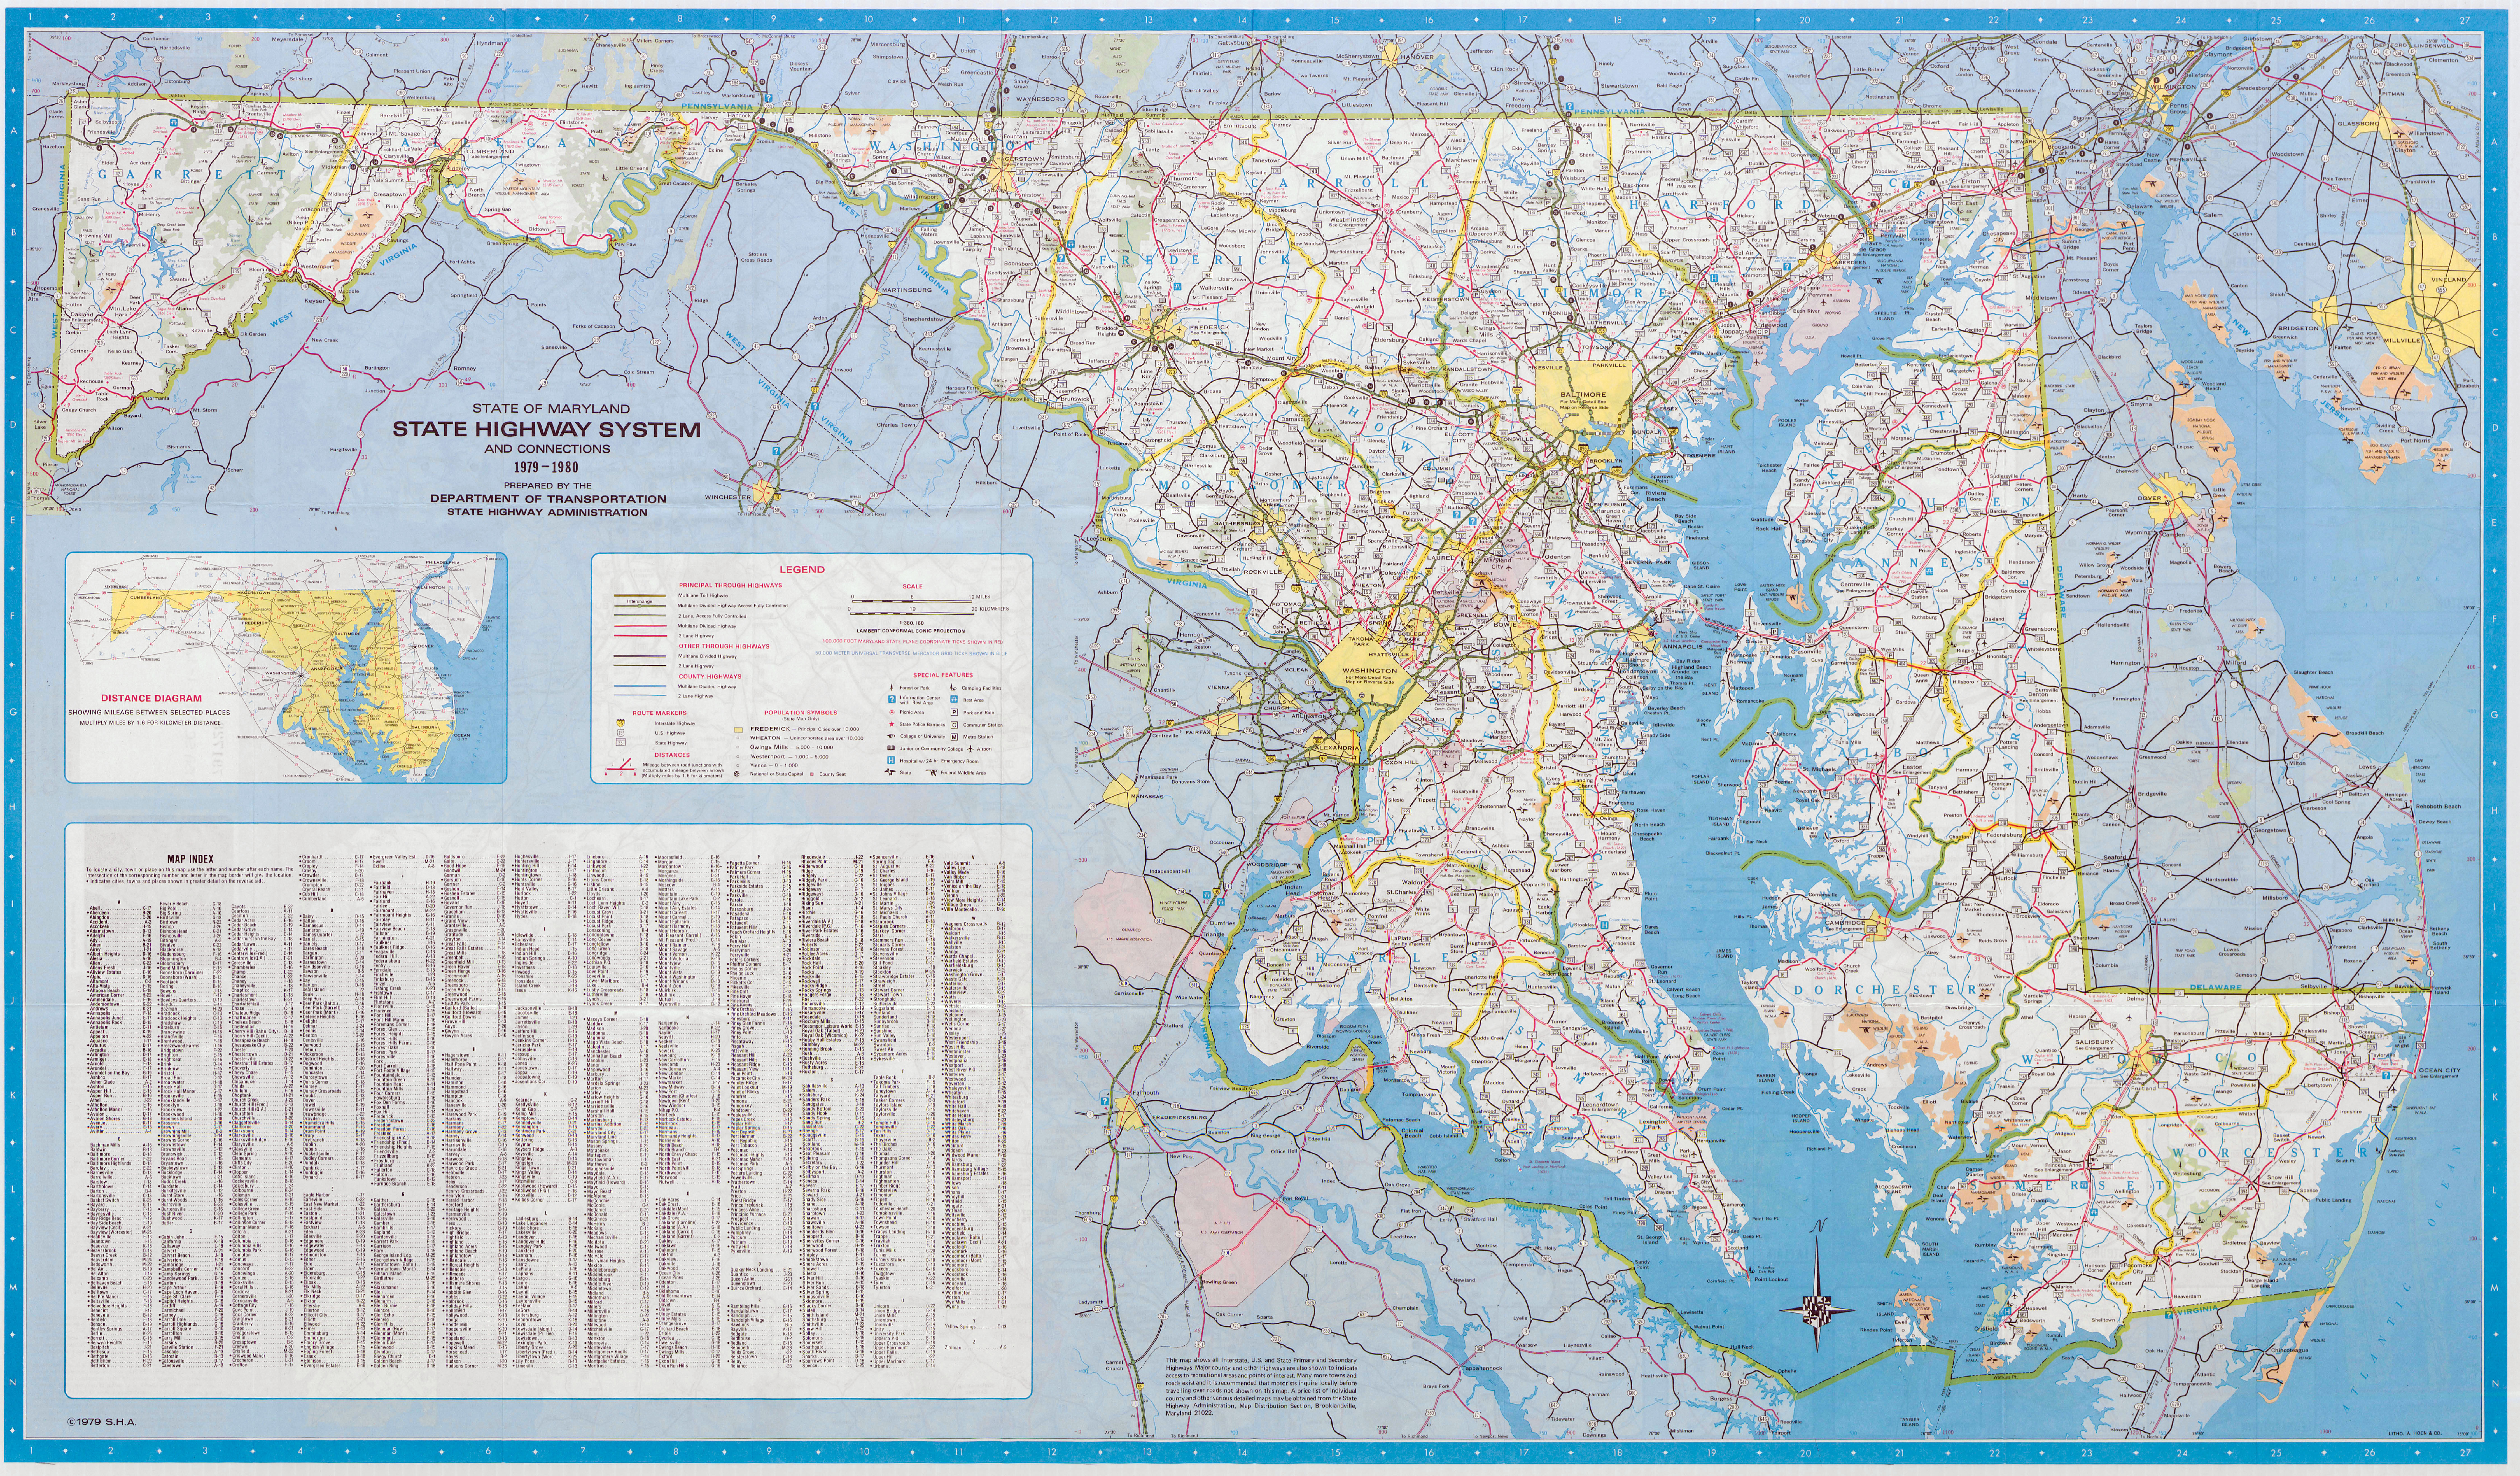 Large Scale Detailed Highway System Map Of Maryland State 1980